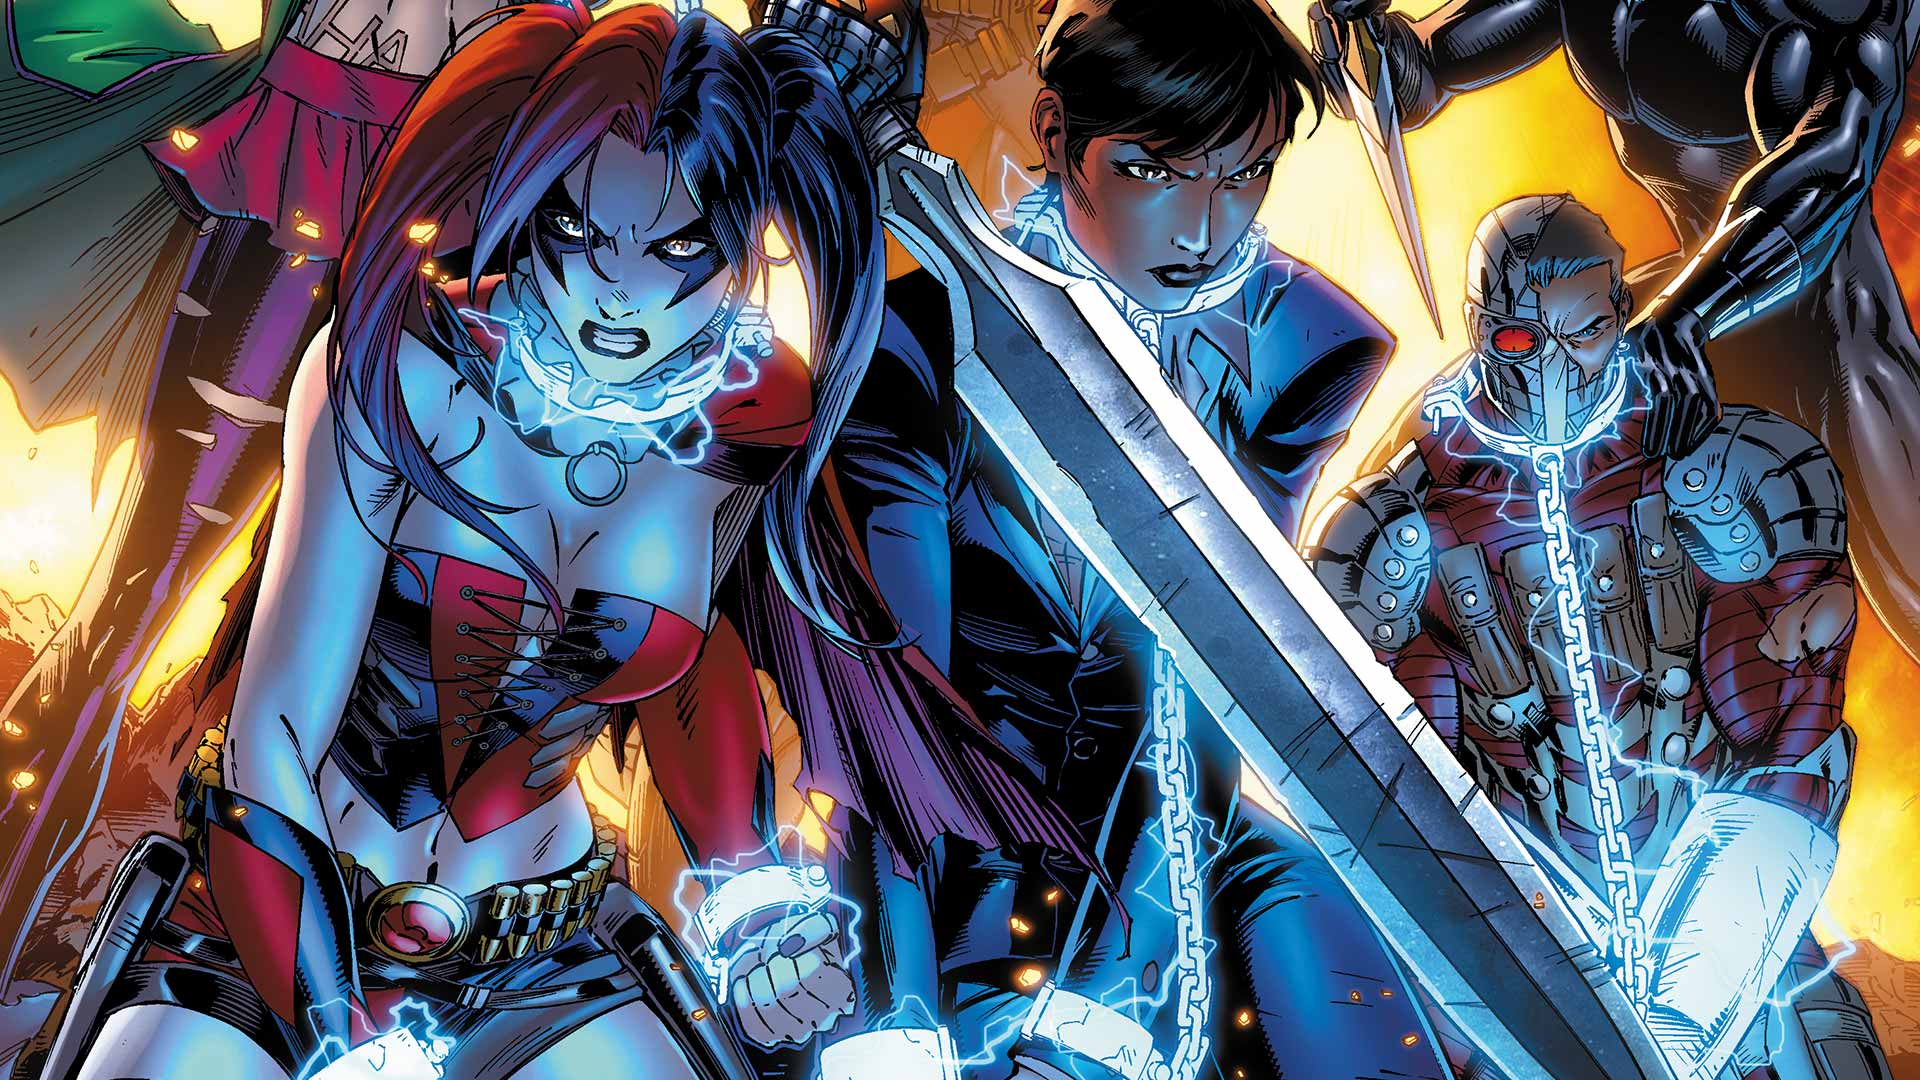 New Suicide Squad Pure Insanity Review by Deffinition as part of Graphic Novel Talk